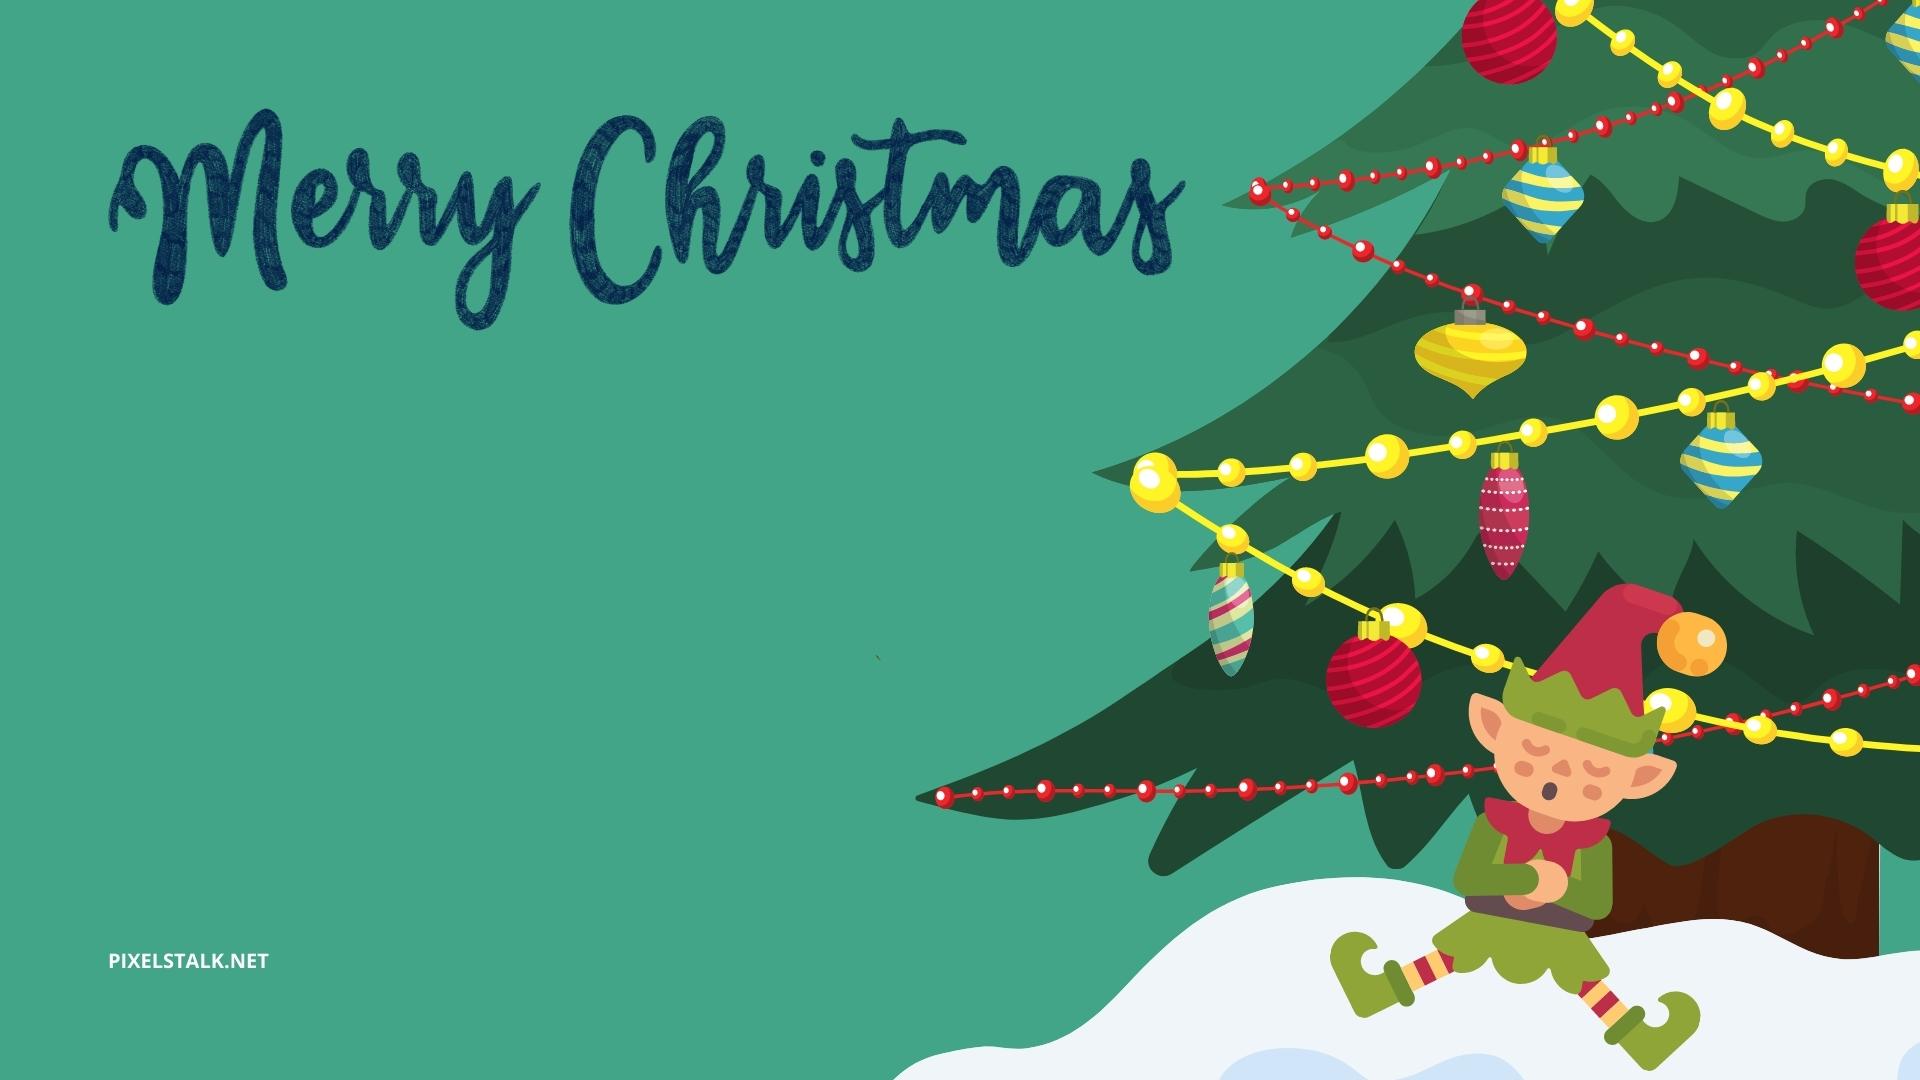 Merry Christmas Tree Wallpapers free download 